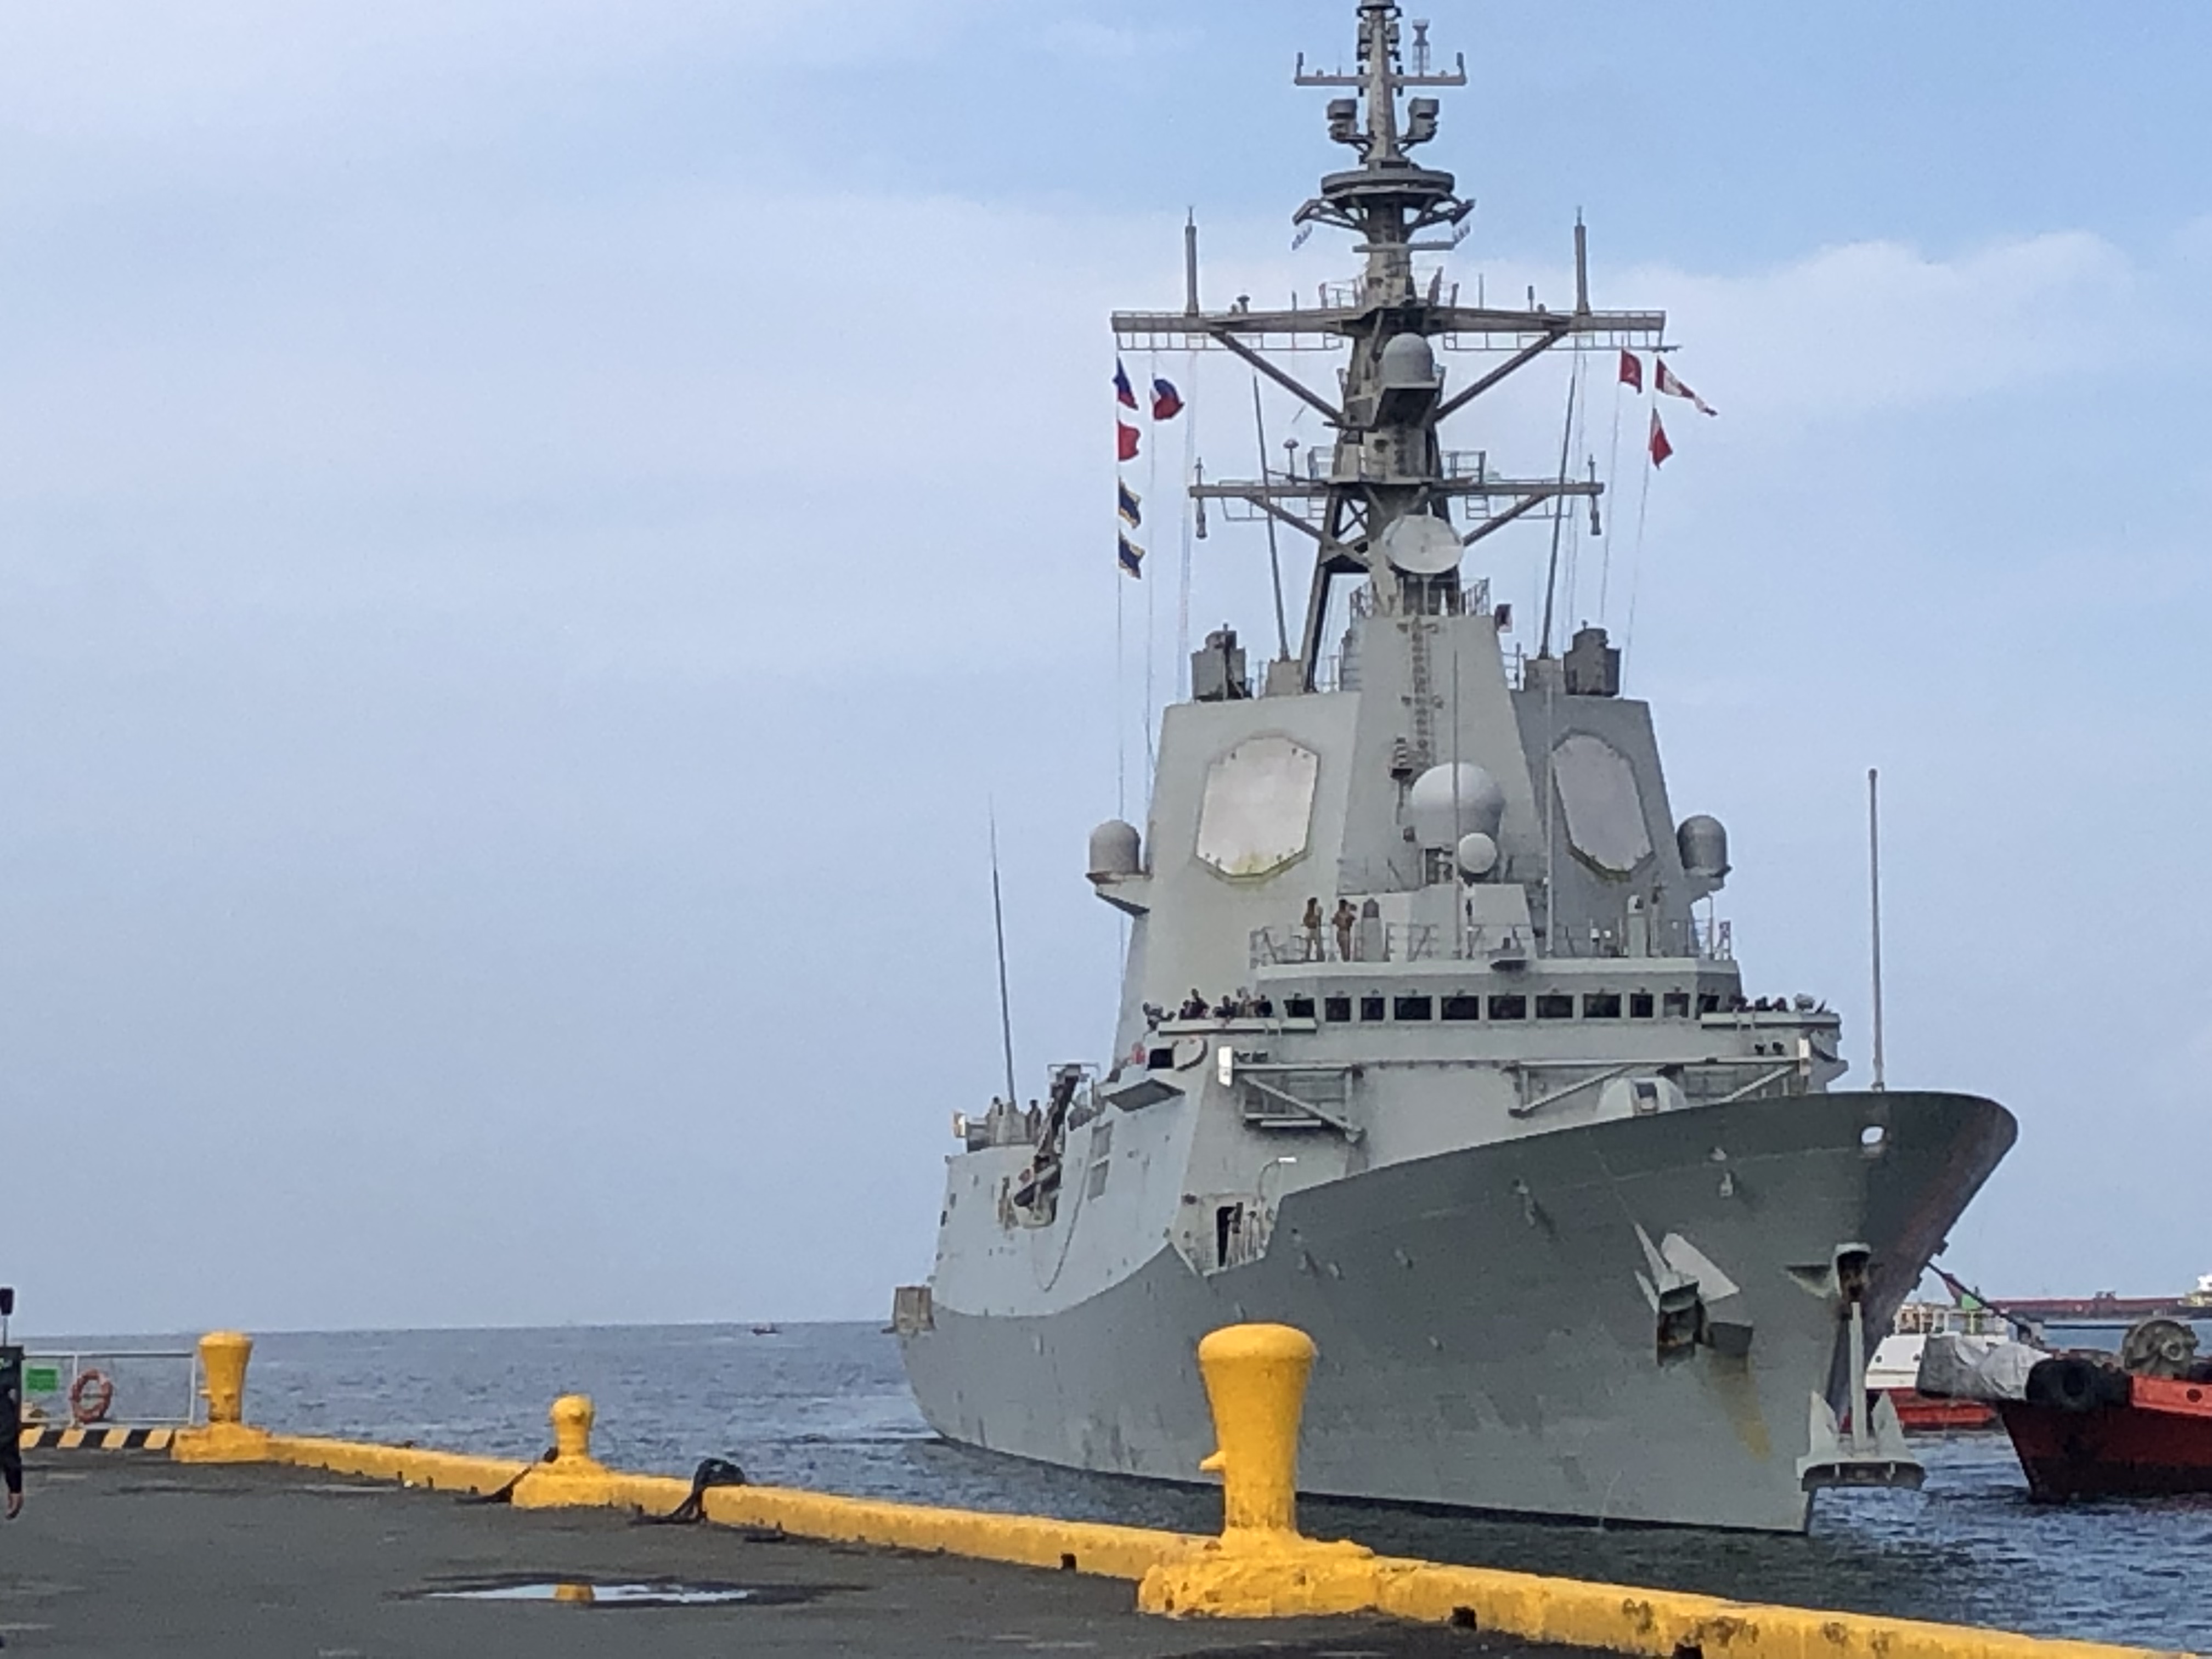 Spanish Navy frigate stops in Manila as it traces Magellan’s voyage